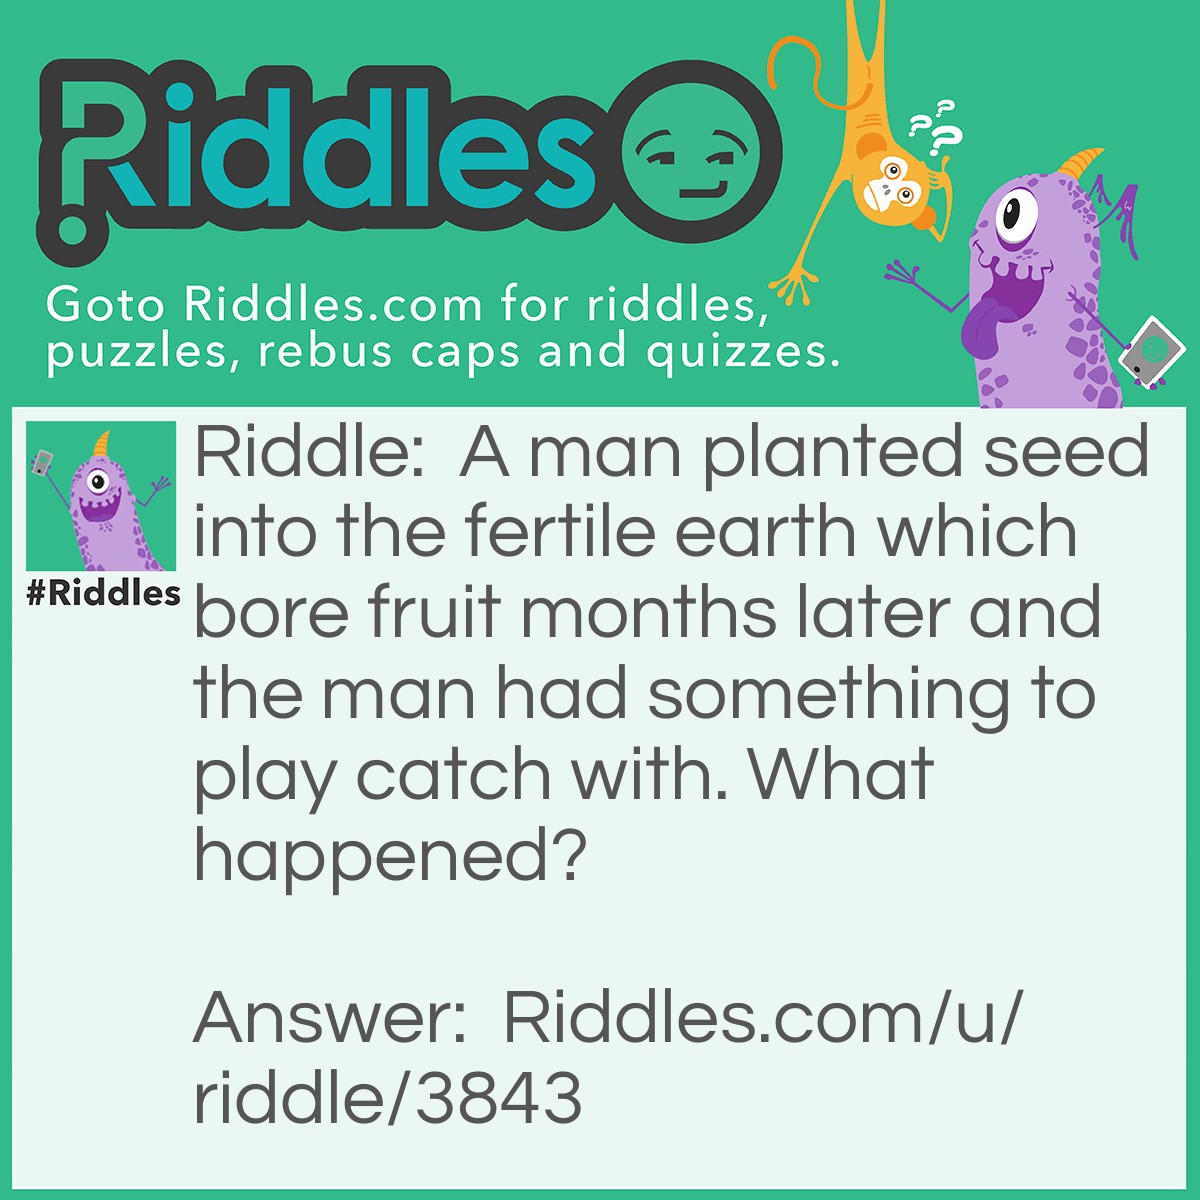 Riddle: A man planted seed into the fertile earth which bore fruit months later and the man had something to play catch with. What happened? Answer: Reproduction (fruit of the womb).